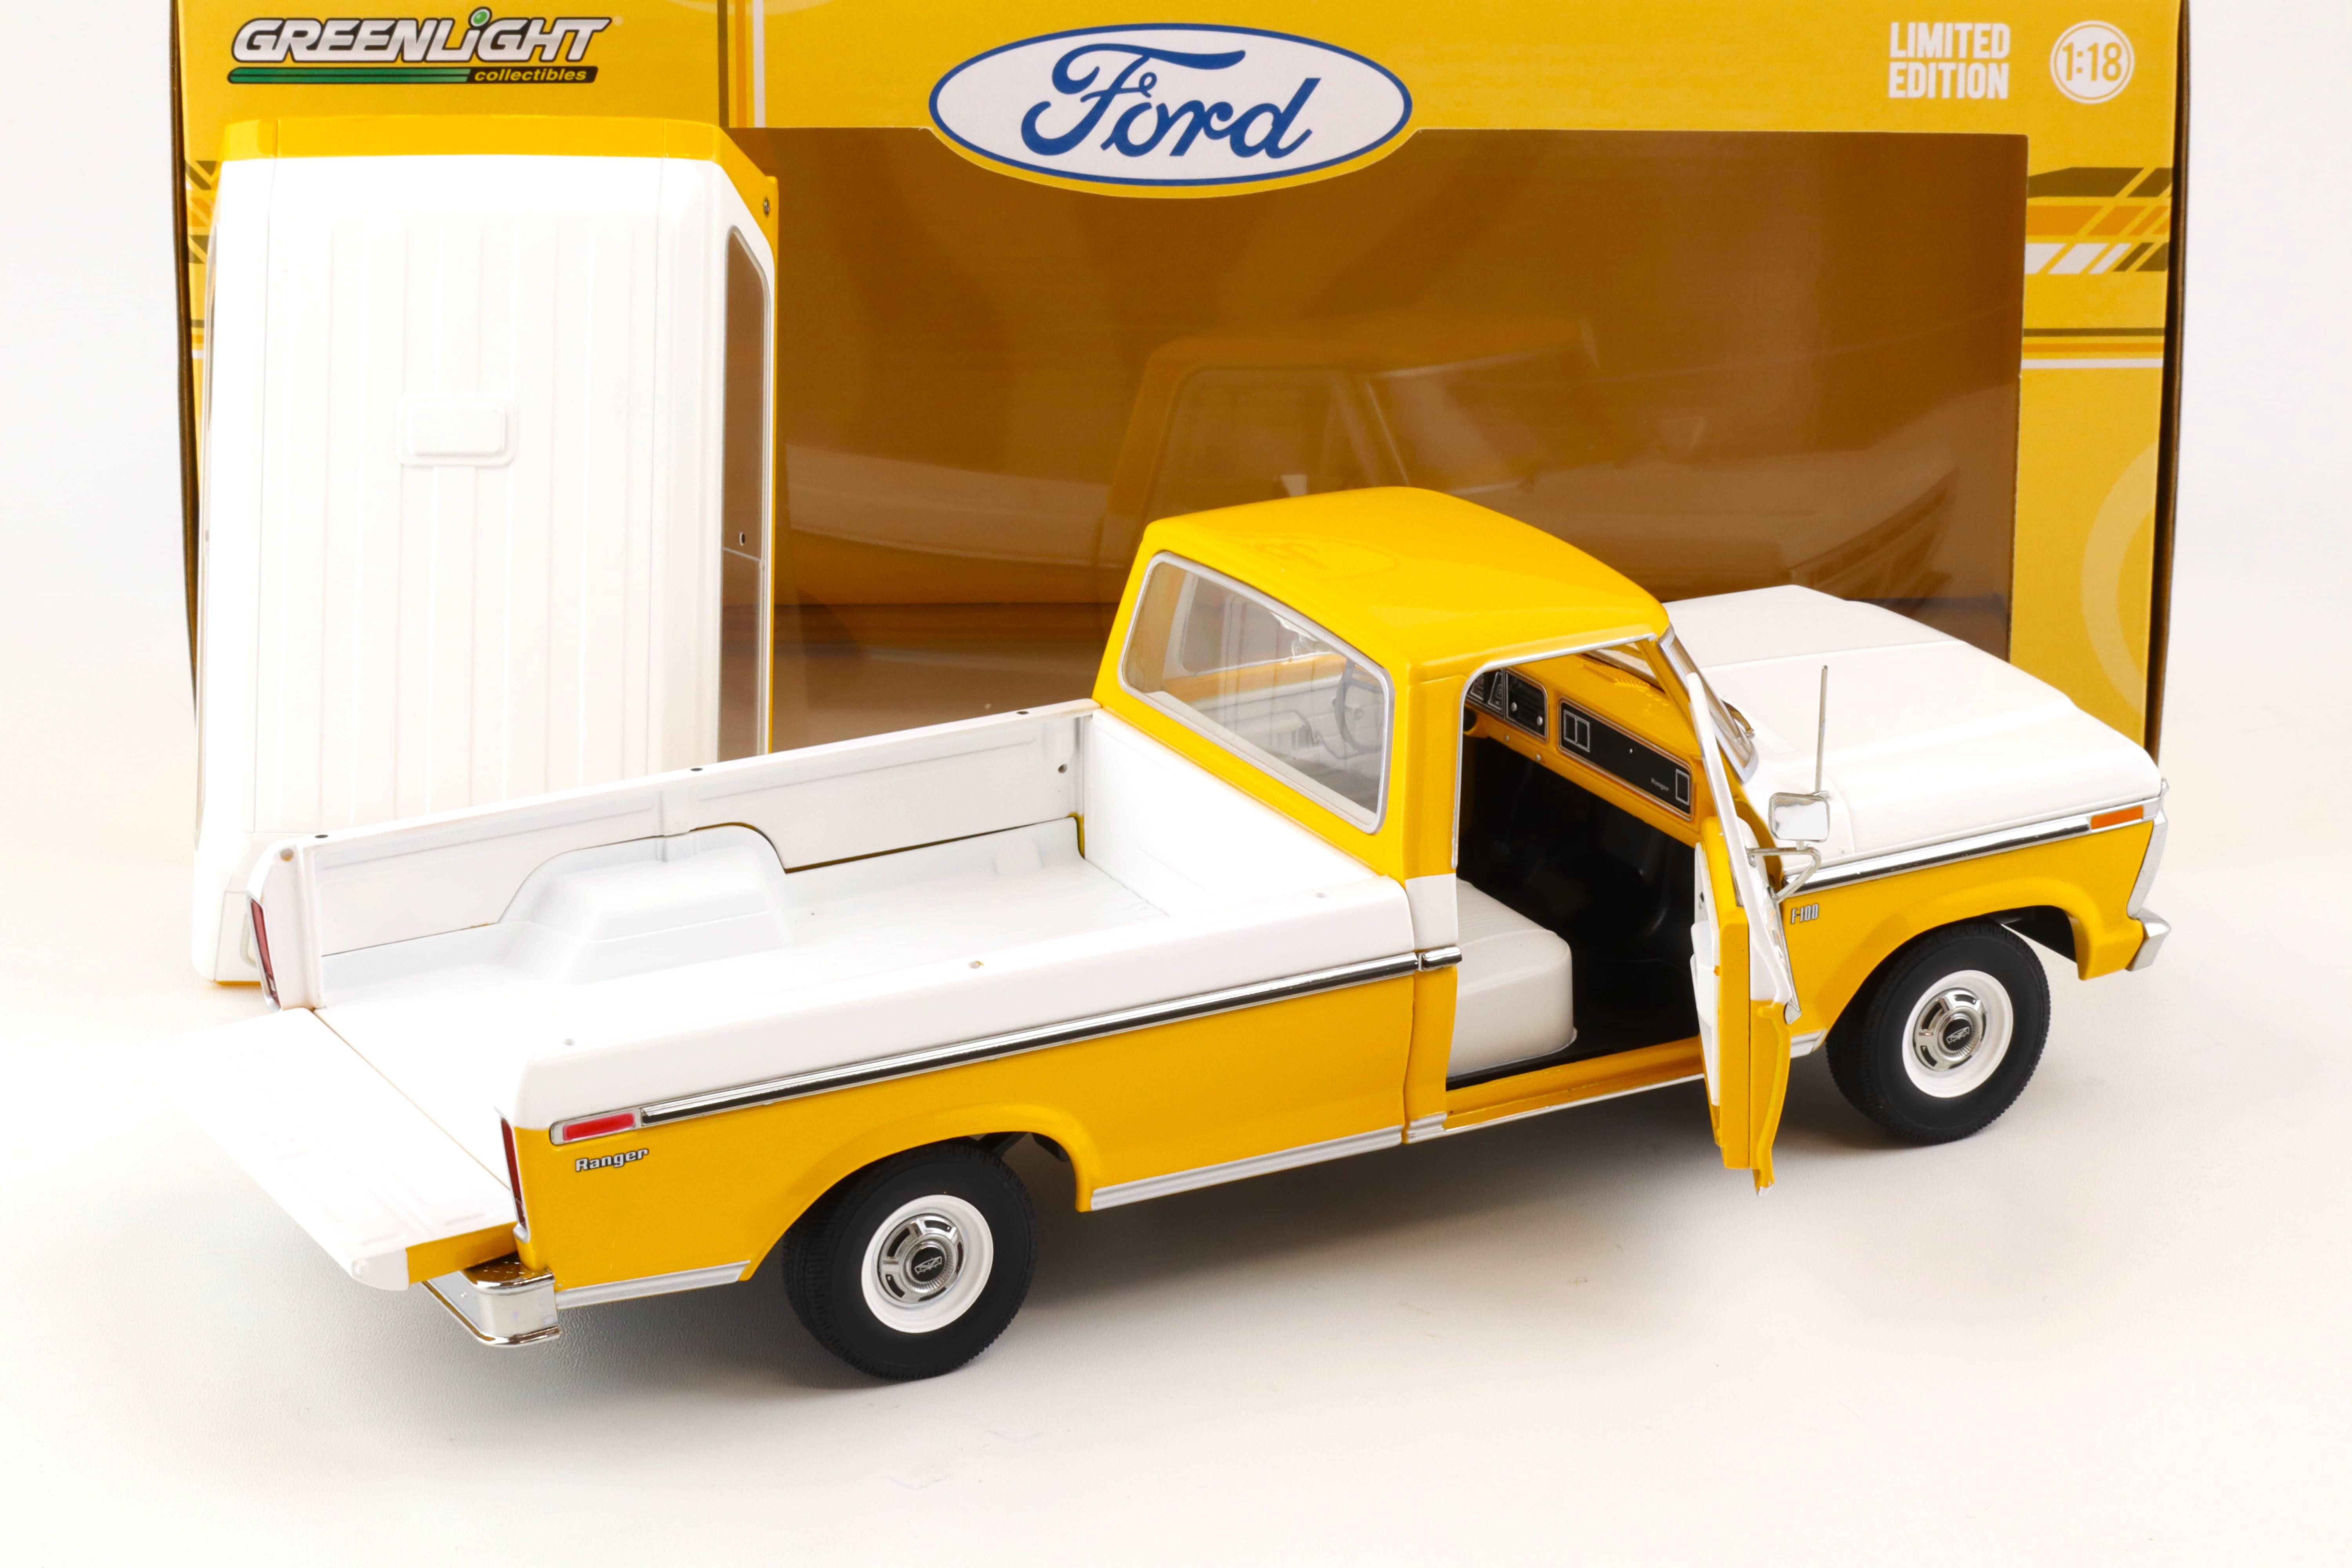 1:18 Greenlight 1976 Ford F-100 Pick Up with removable Hardtop white/ yellow